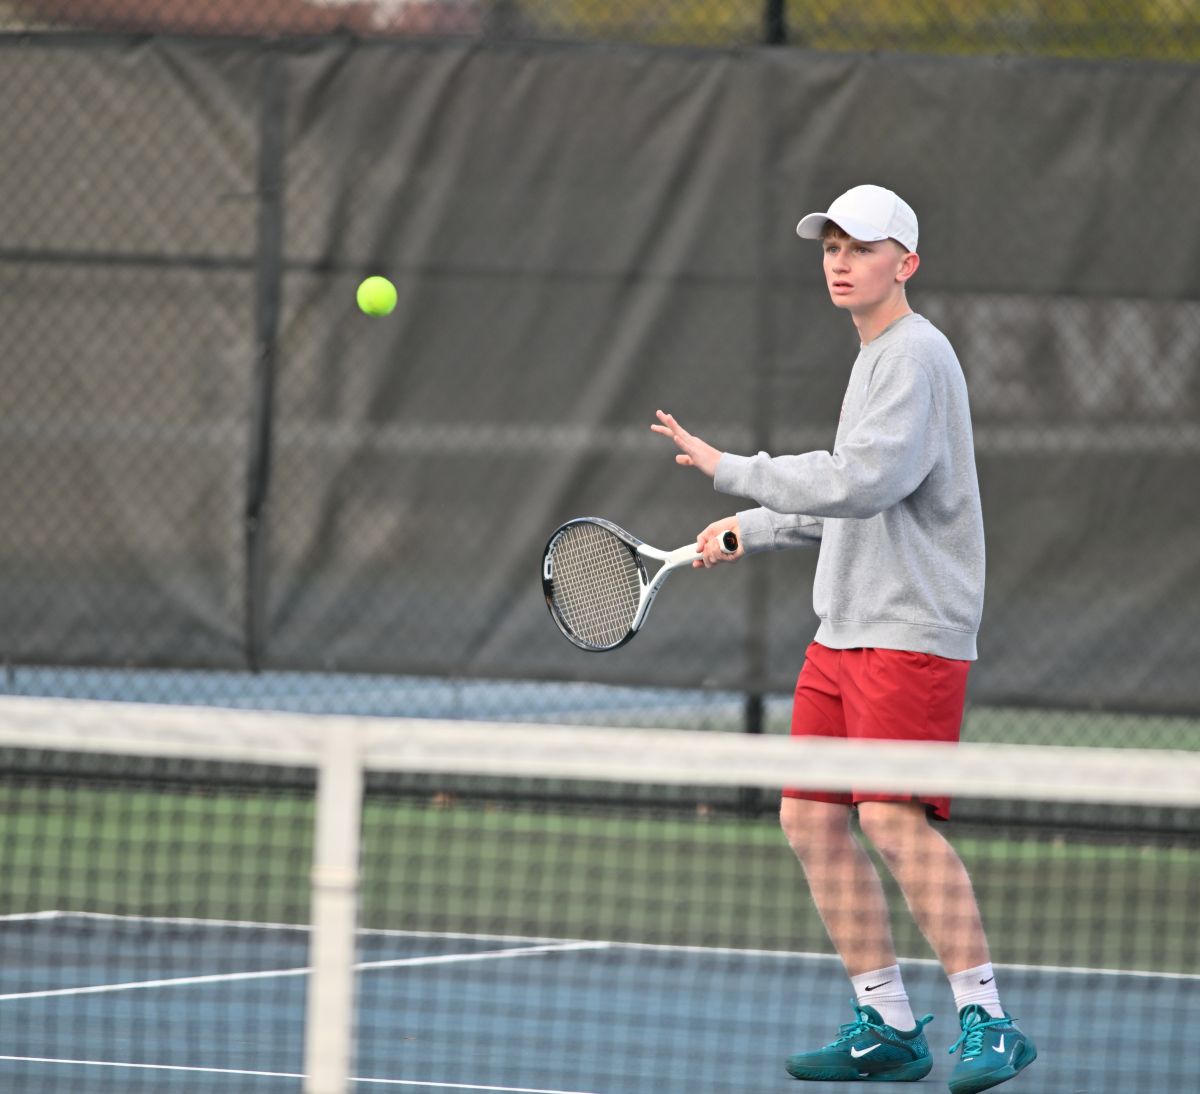 dover-at-np-tennis-4-4-24-20.jpg